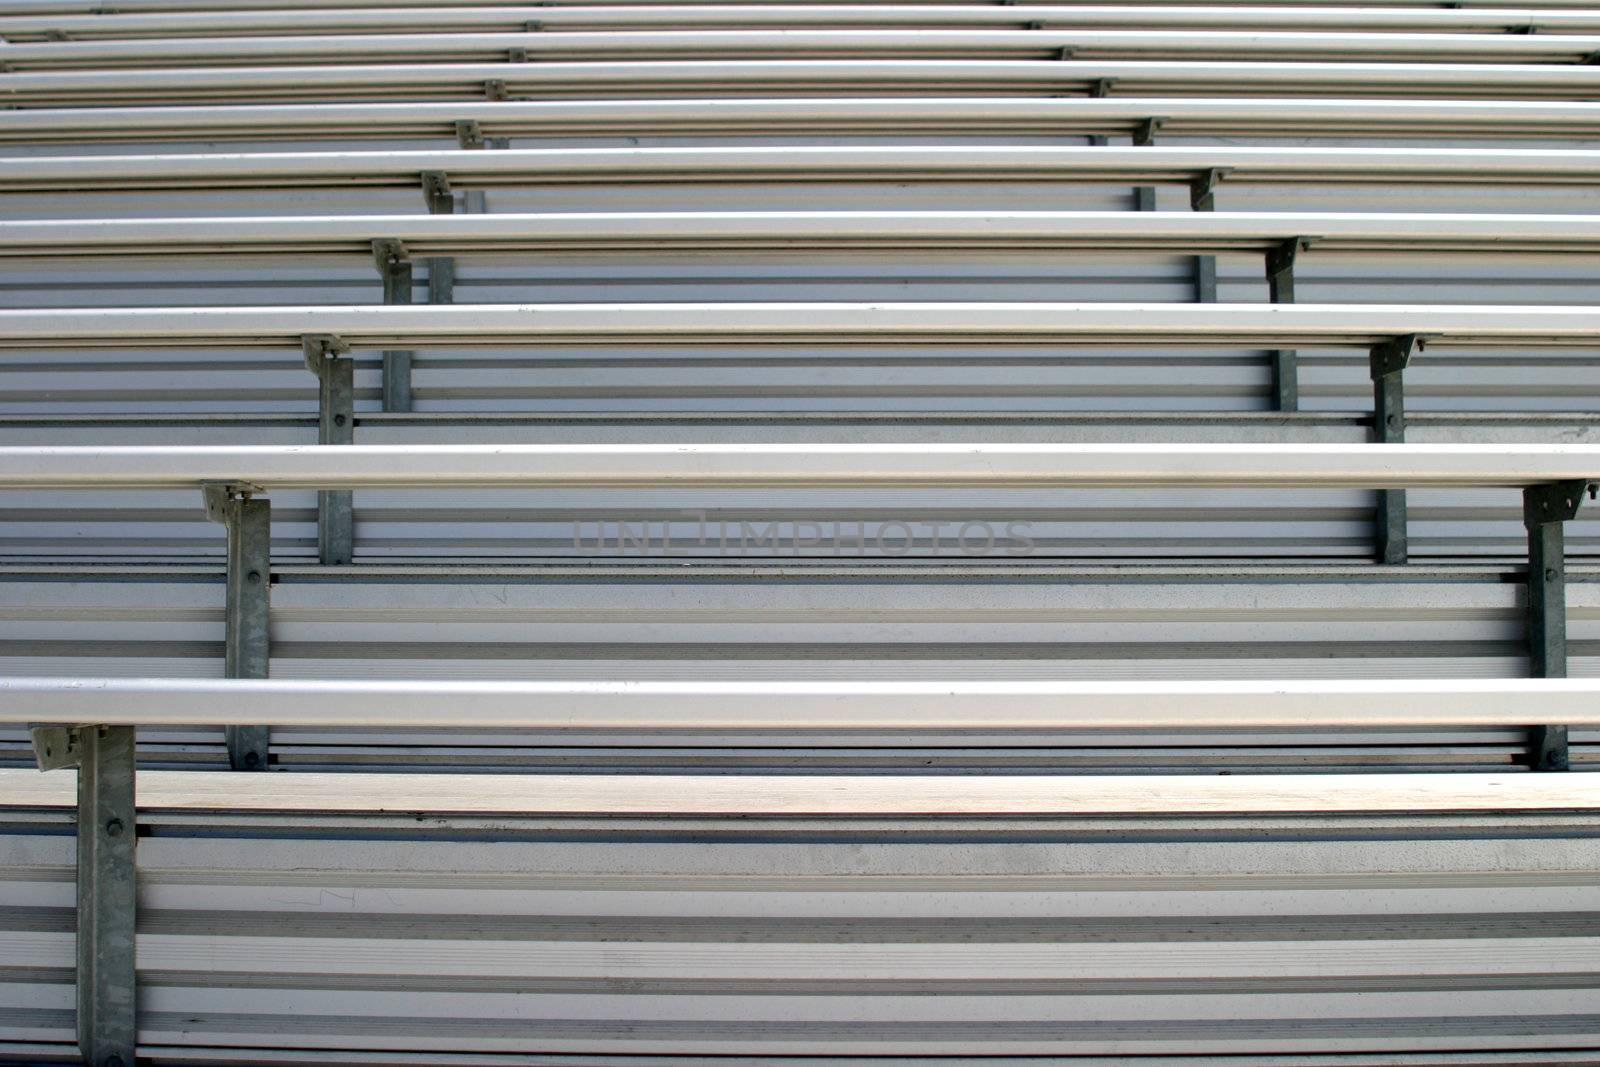 Bleachers in a statium or school for the fans.